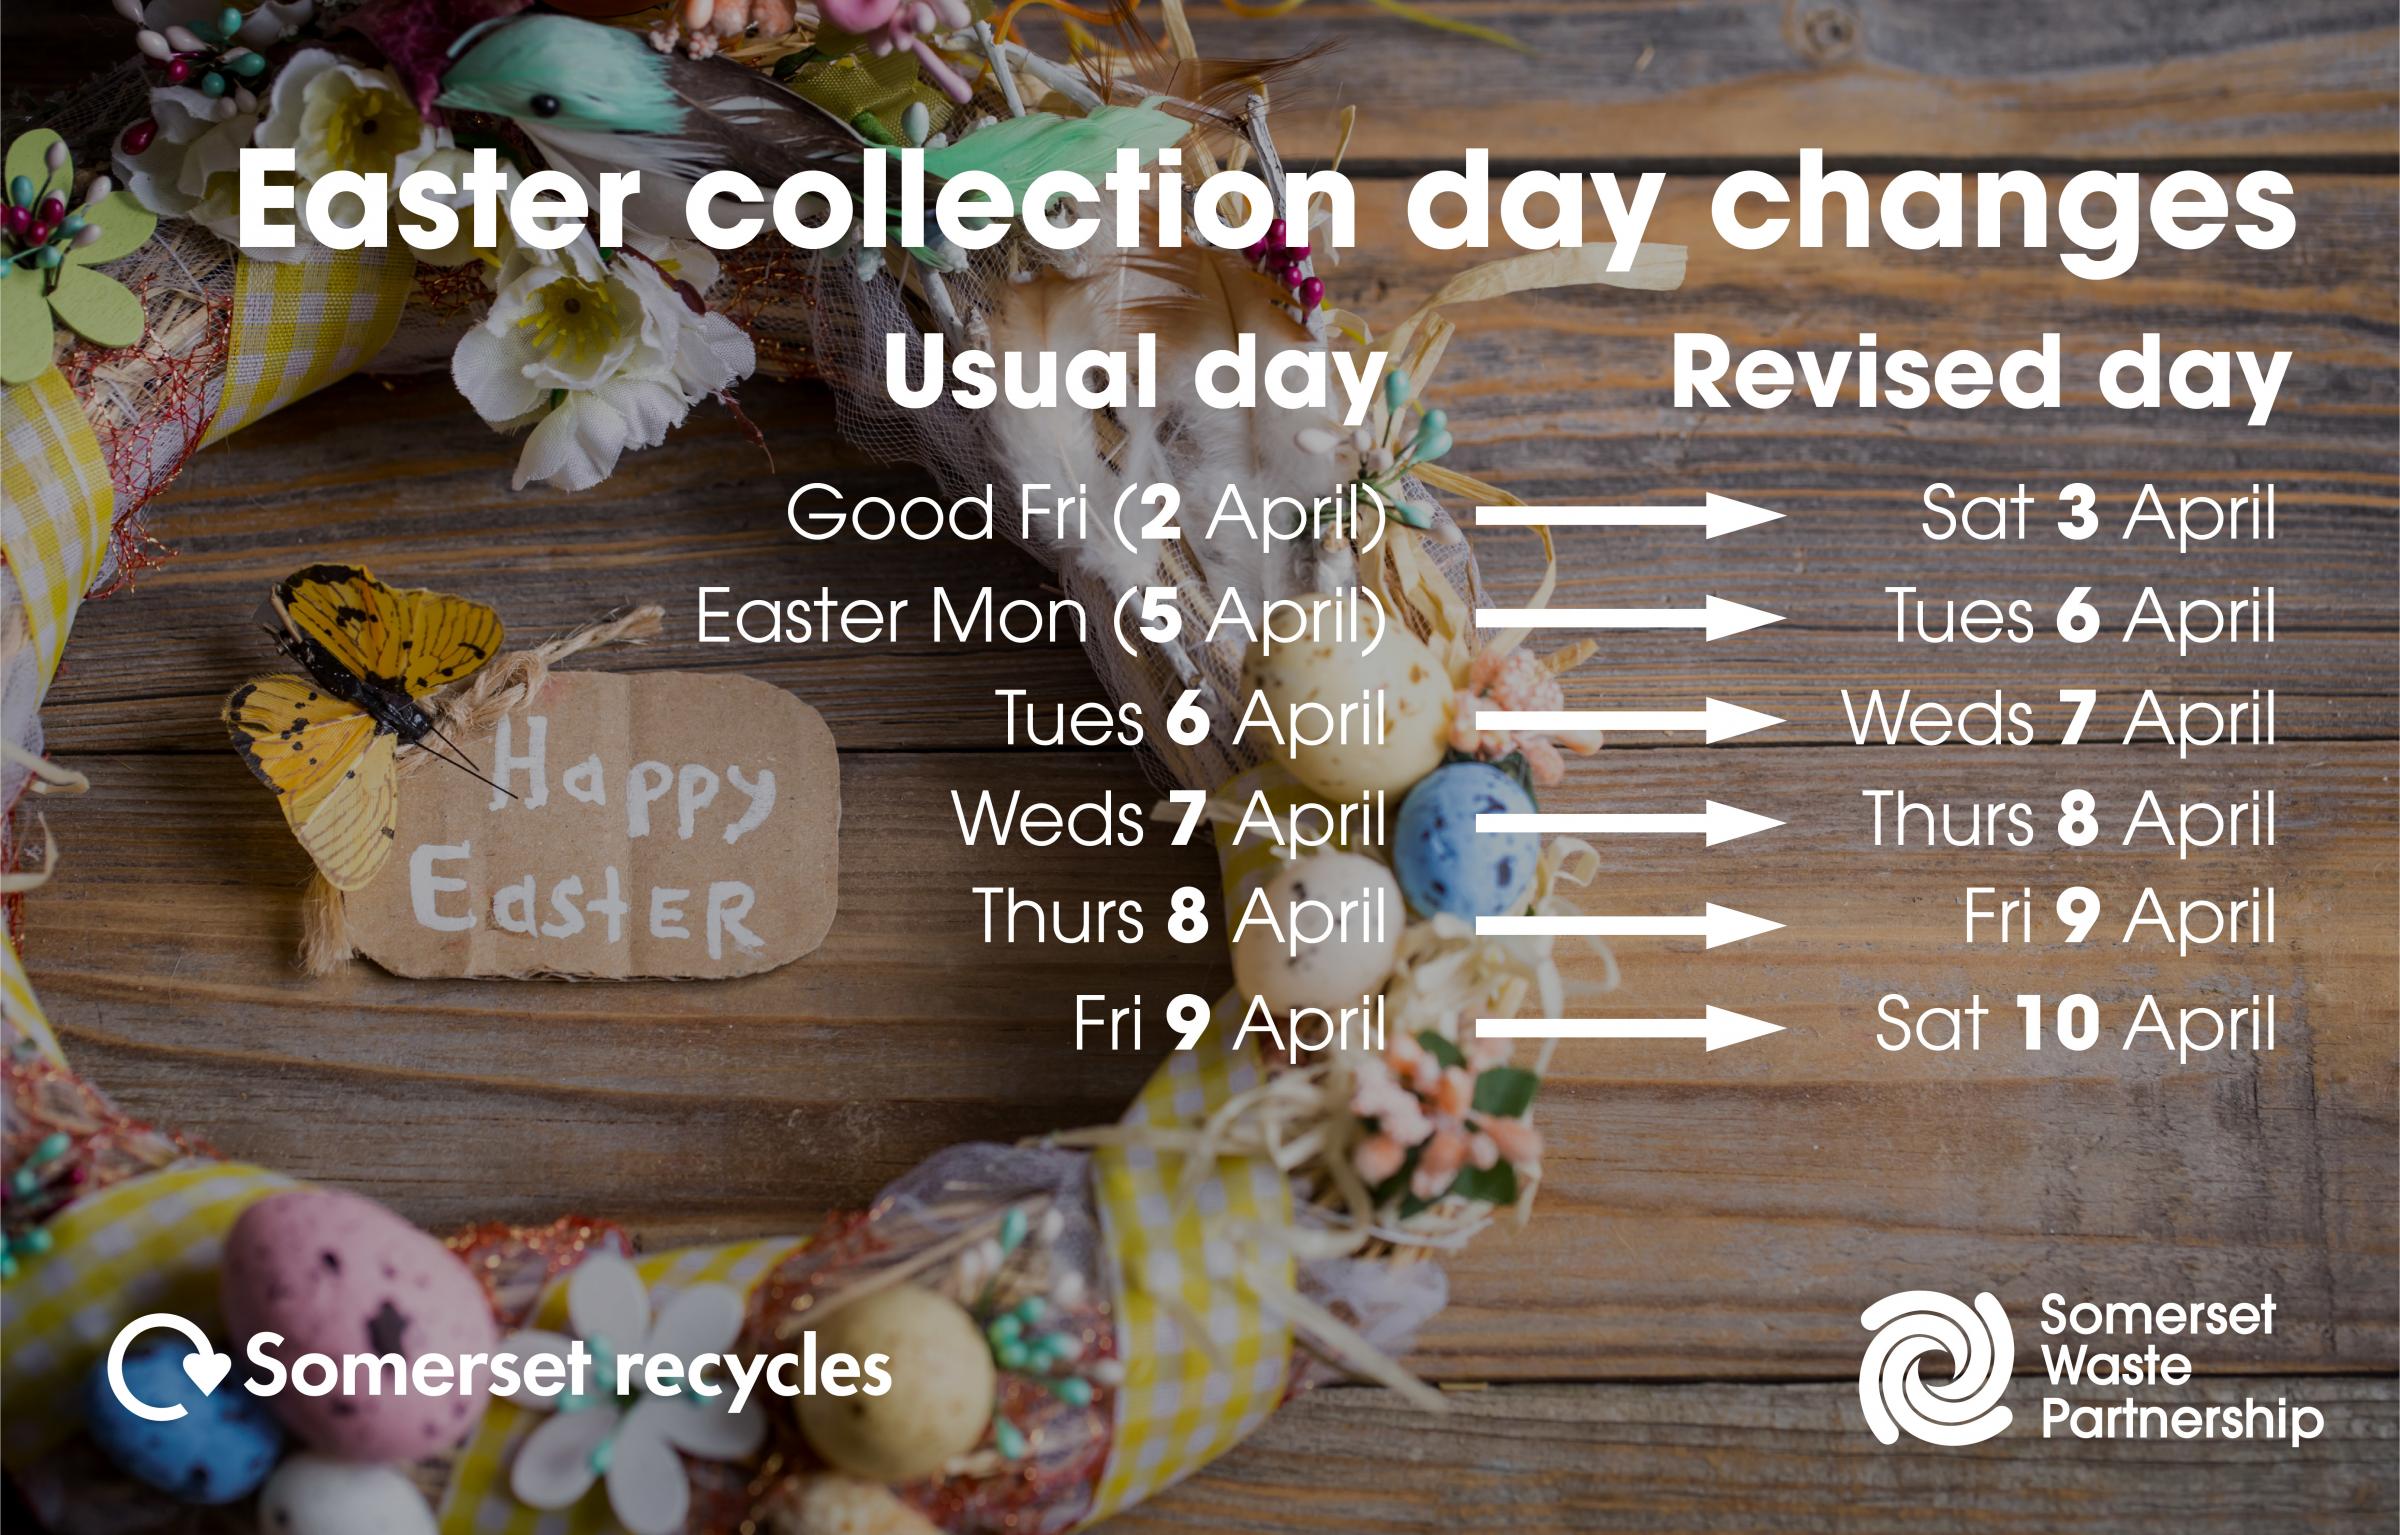 Check out what day to put out your waste and recycling